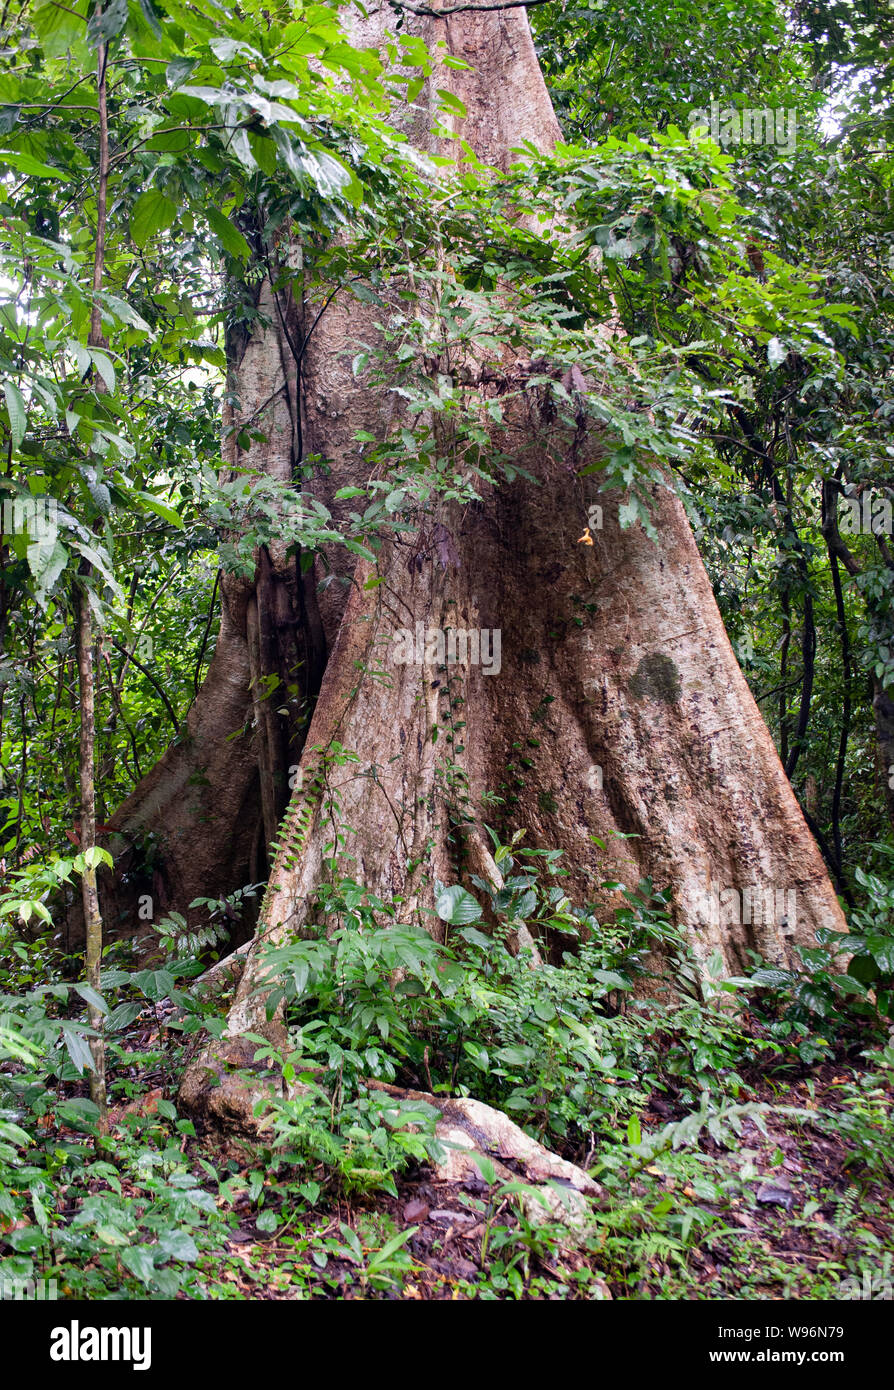 Buttress roots emerge from a tree in tropical, moist evergreen rainforest, Western Ghats, Kerala, Southern India Stock Photo